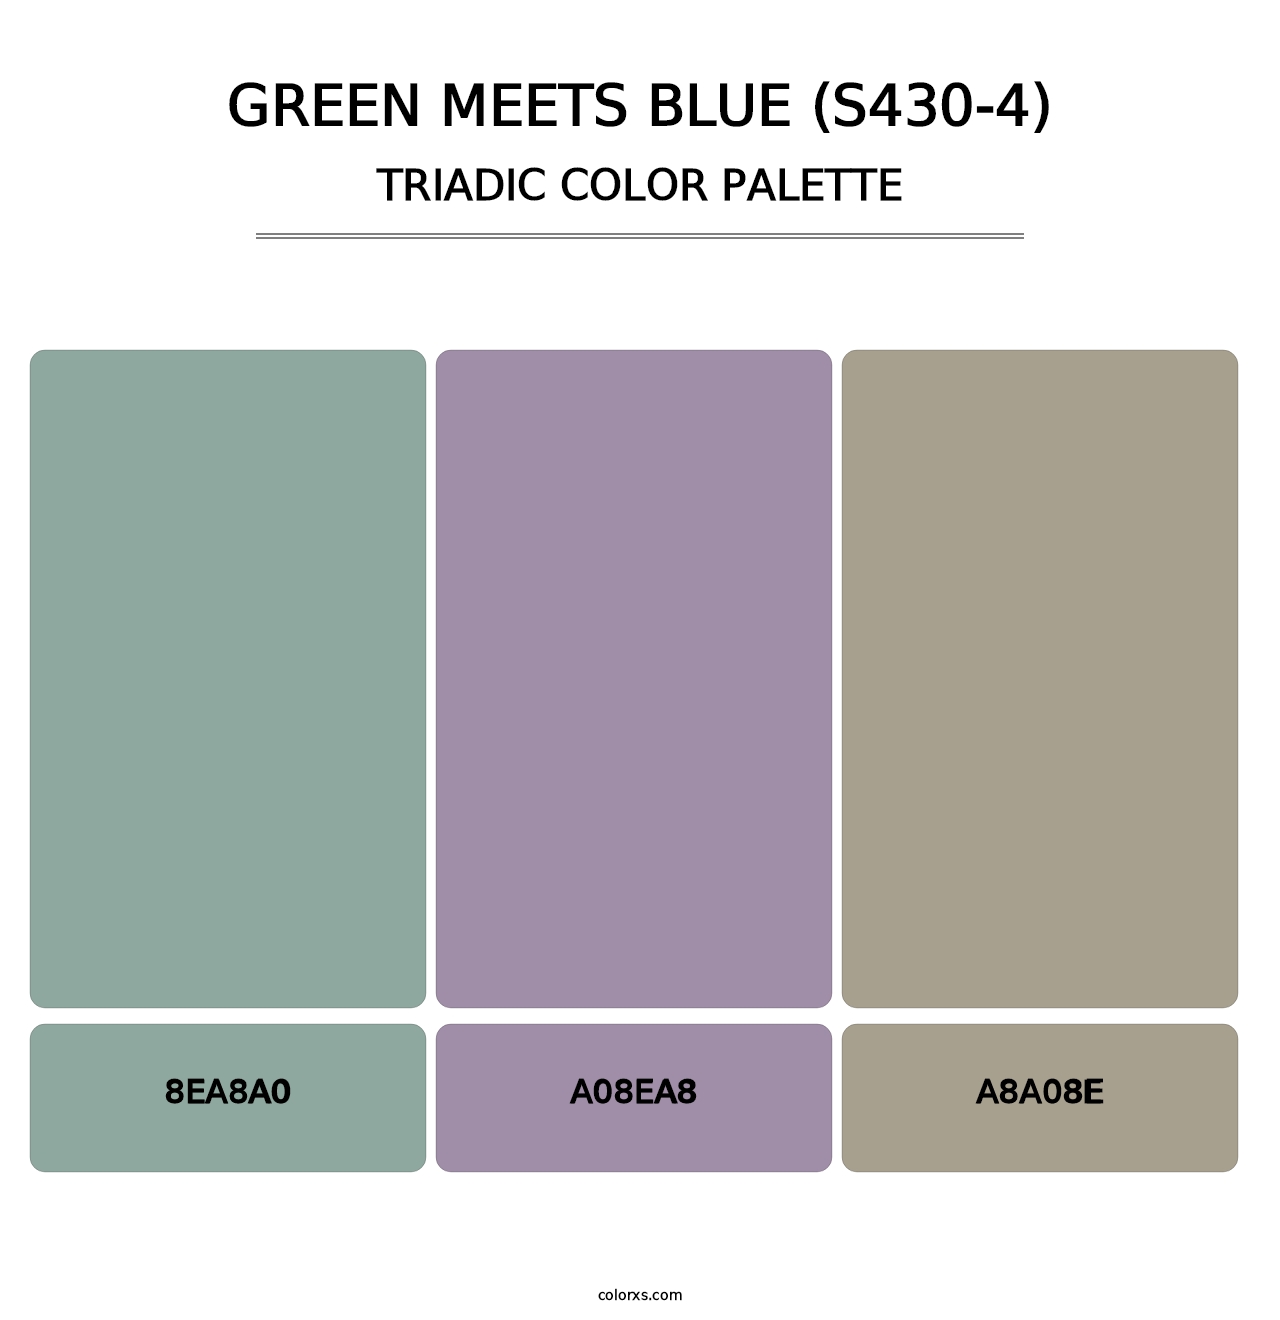 Green Meets Blue (S430-4) - Triadic Color Palette